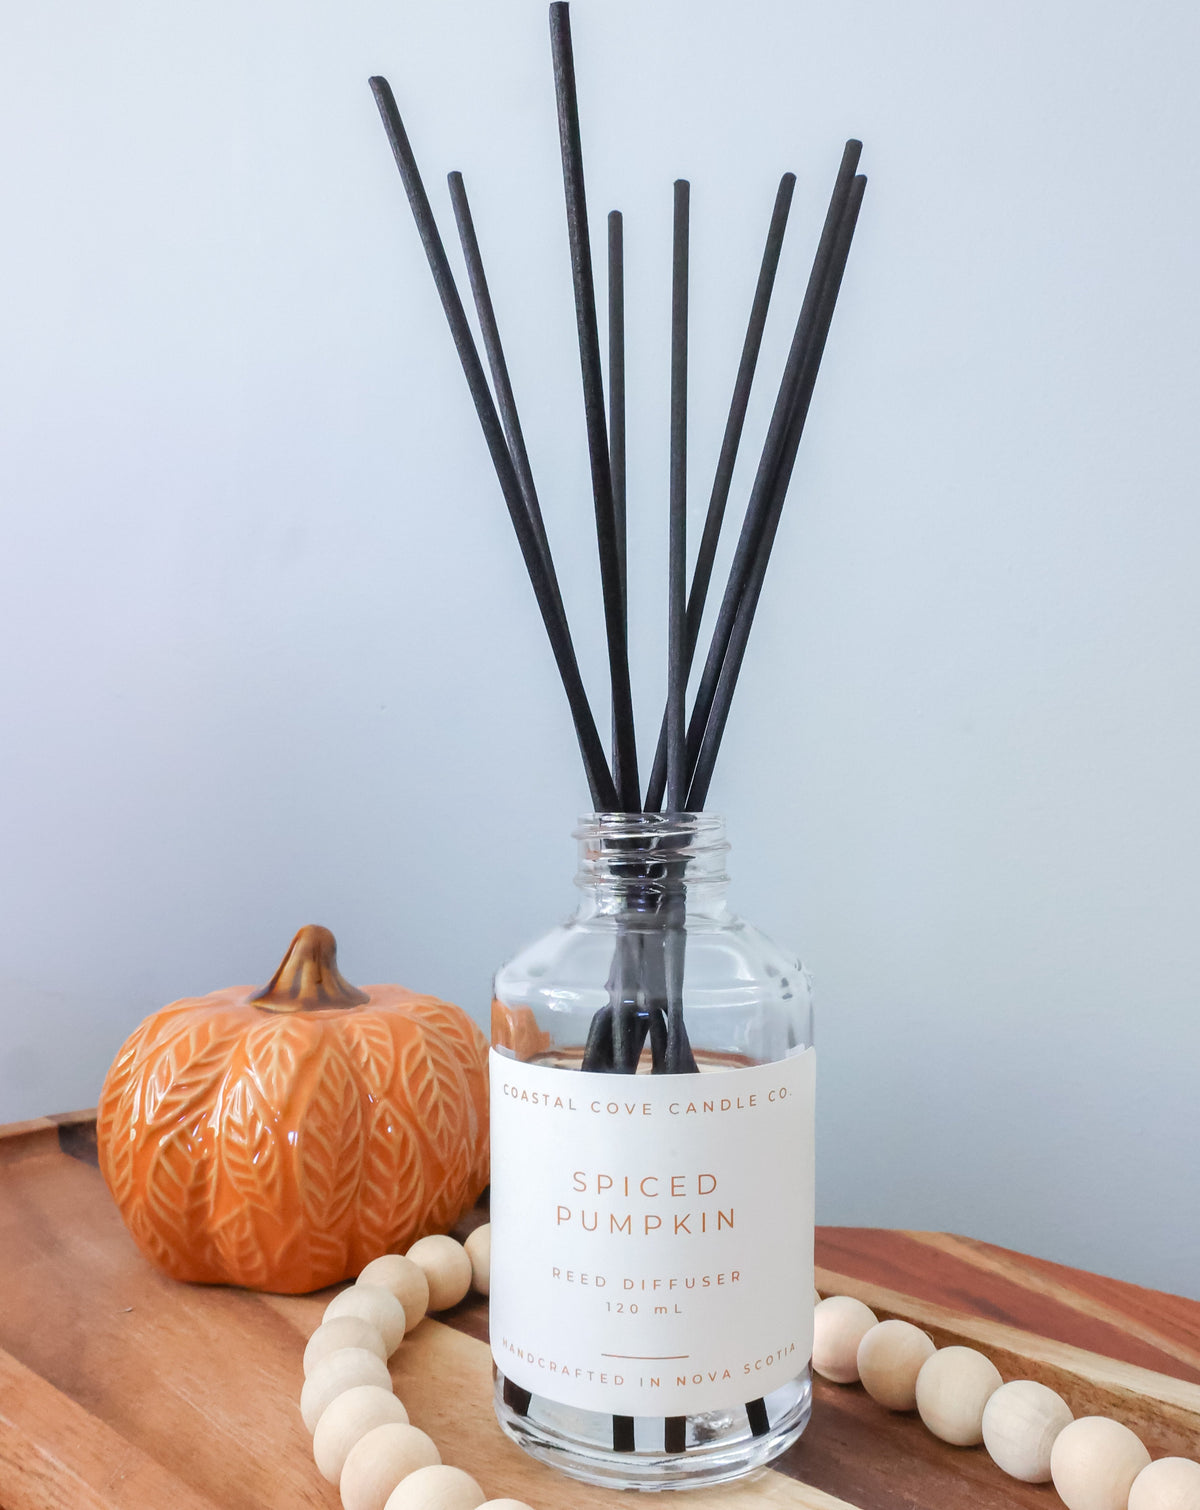 reed diffuser